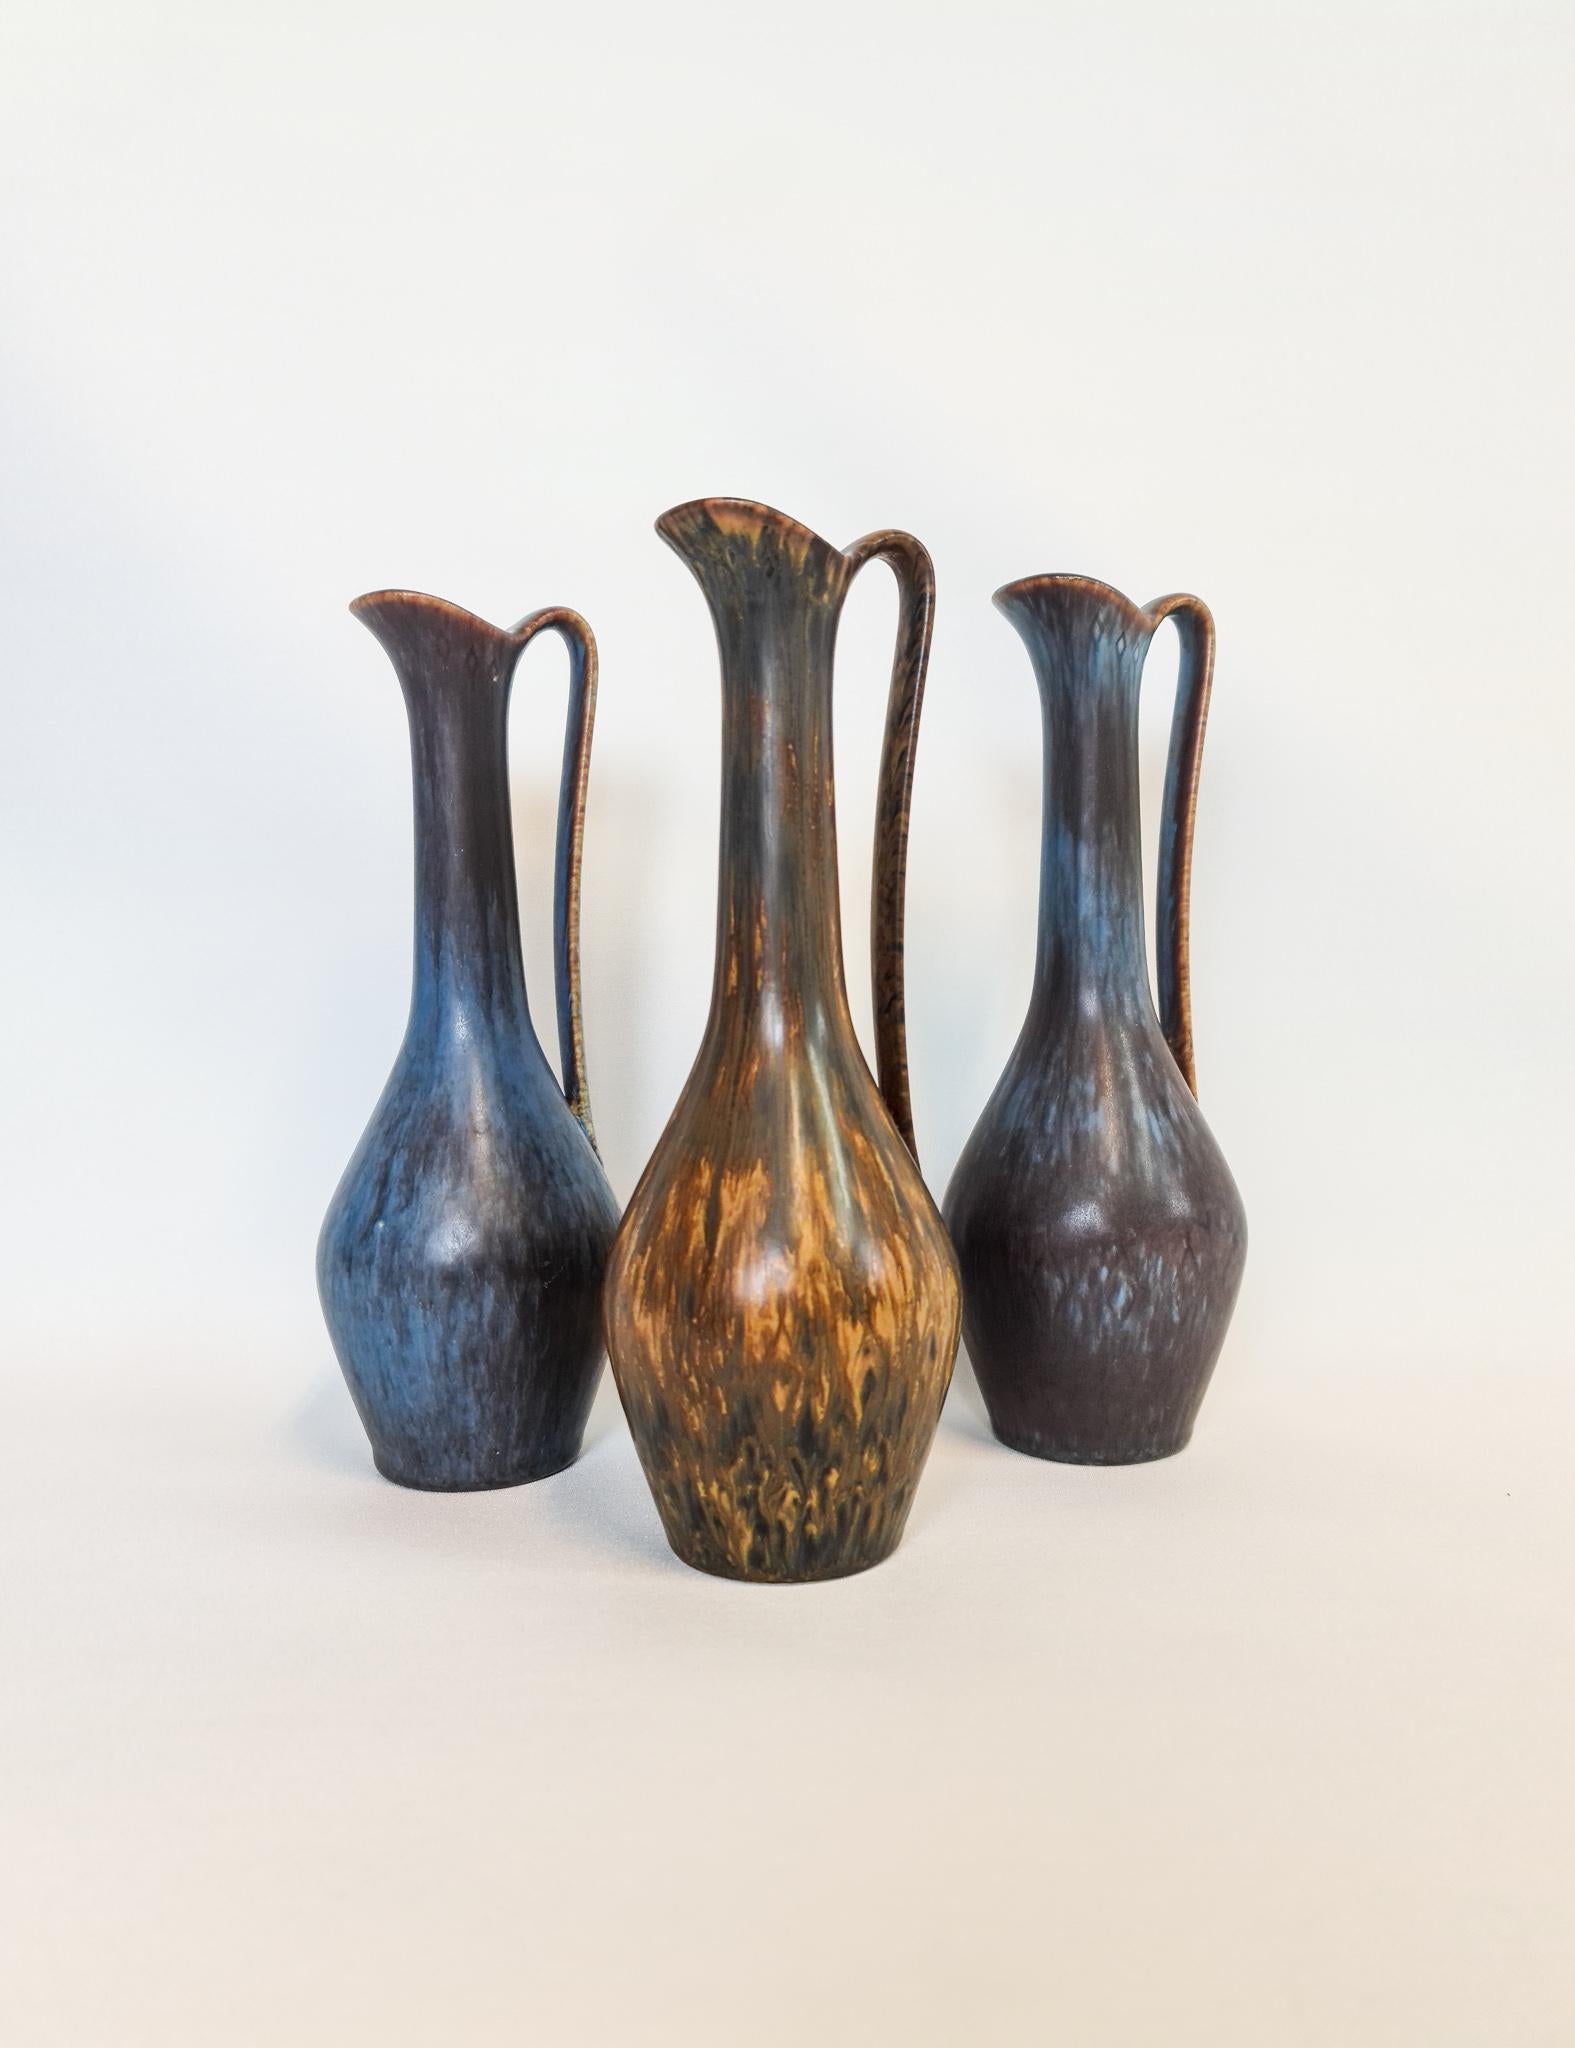 Three wonderful vases from Rörstrand and maker, designer Gunnar Nylund. Made in Sweden in the midcentury. Beautiful glazed vases in good condition.

Measures: H 24 x D 8cm.
      